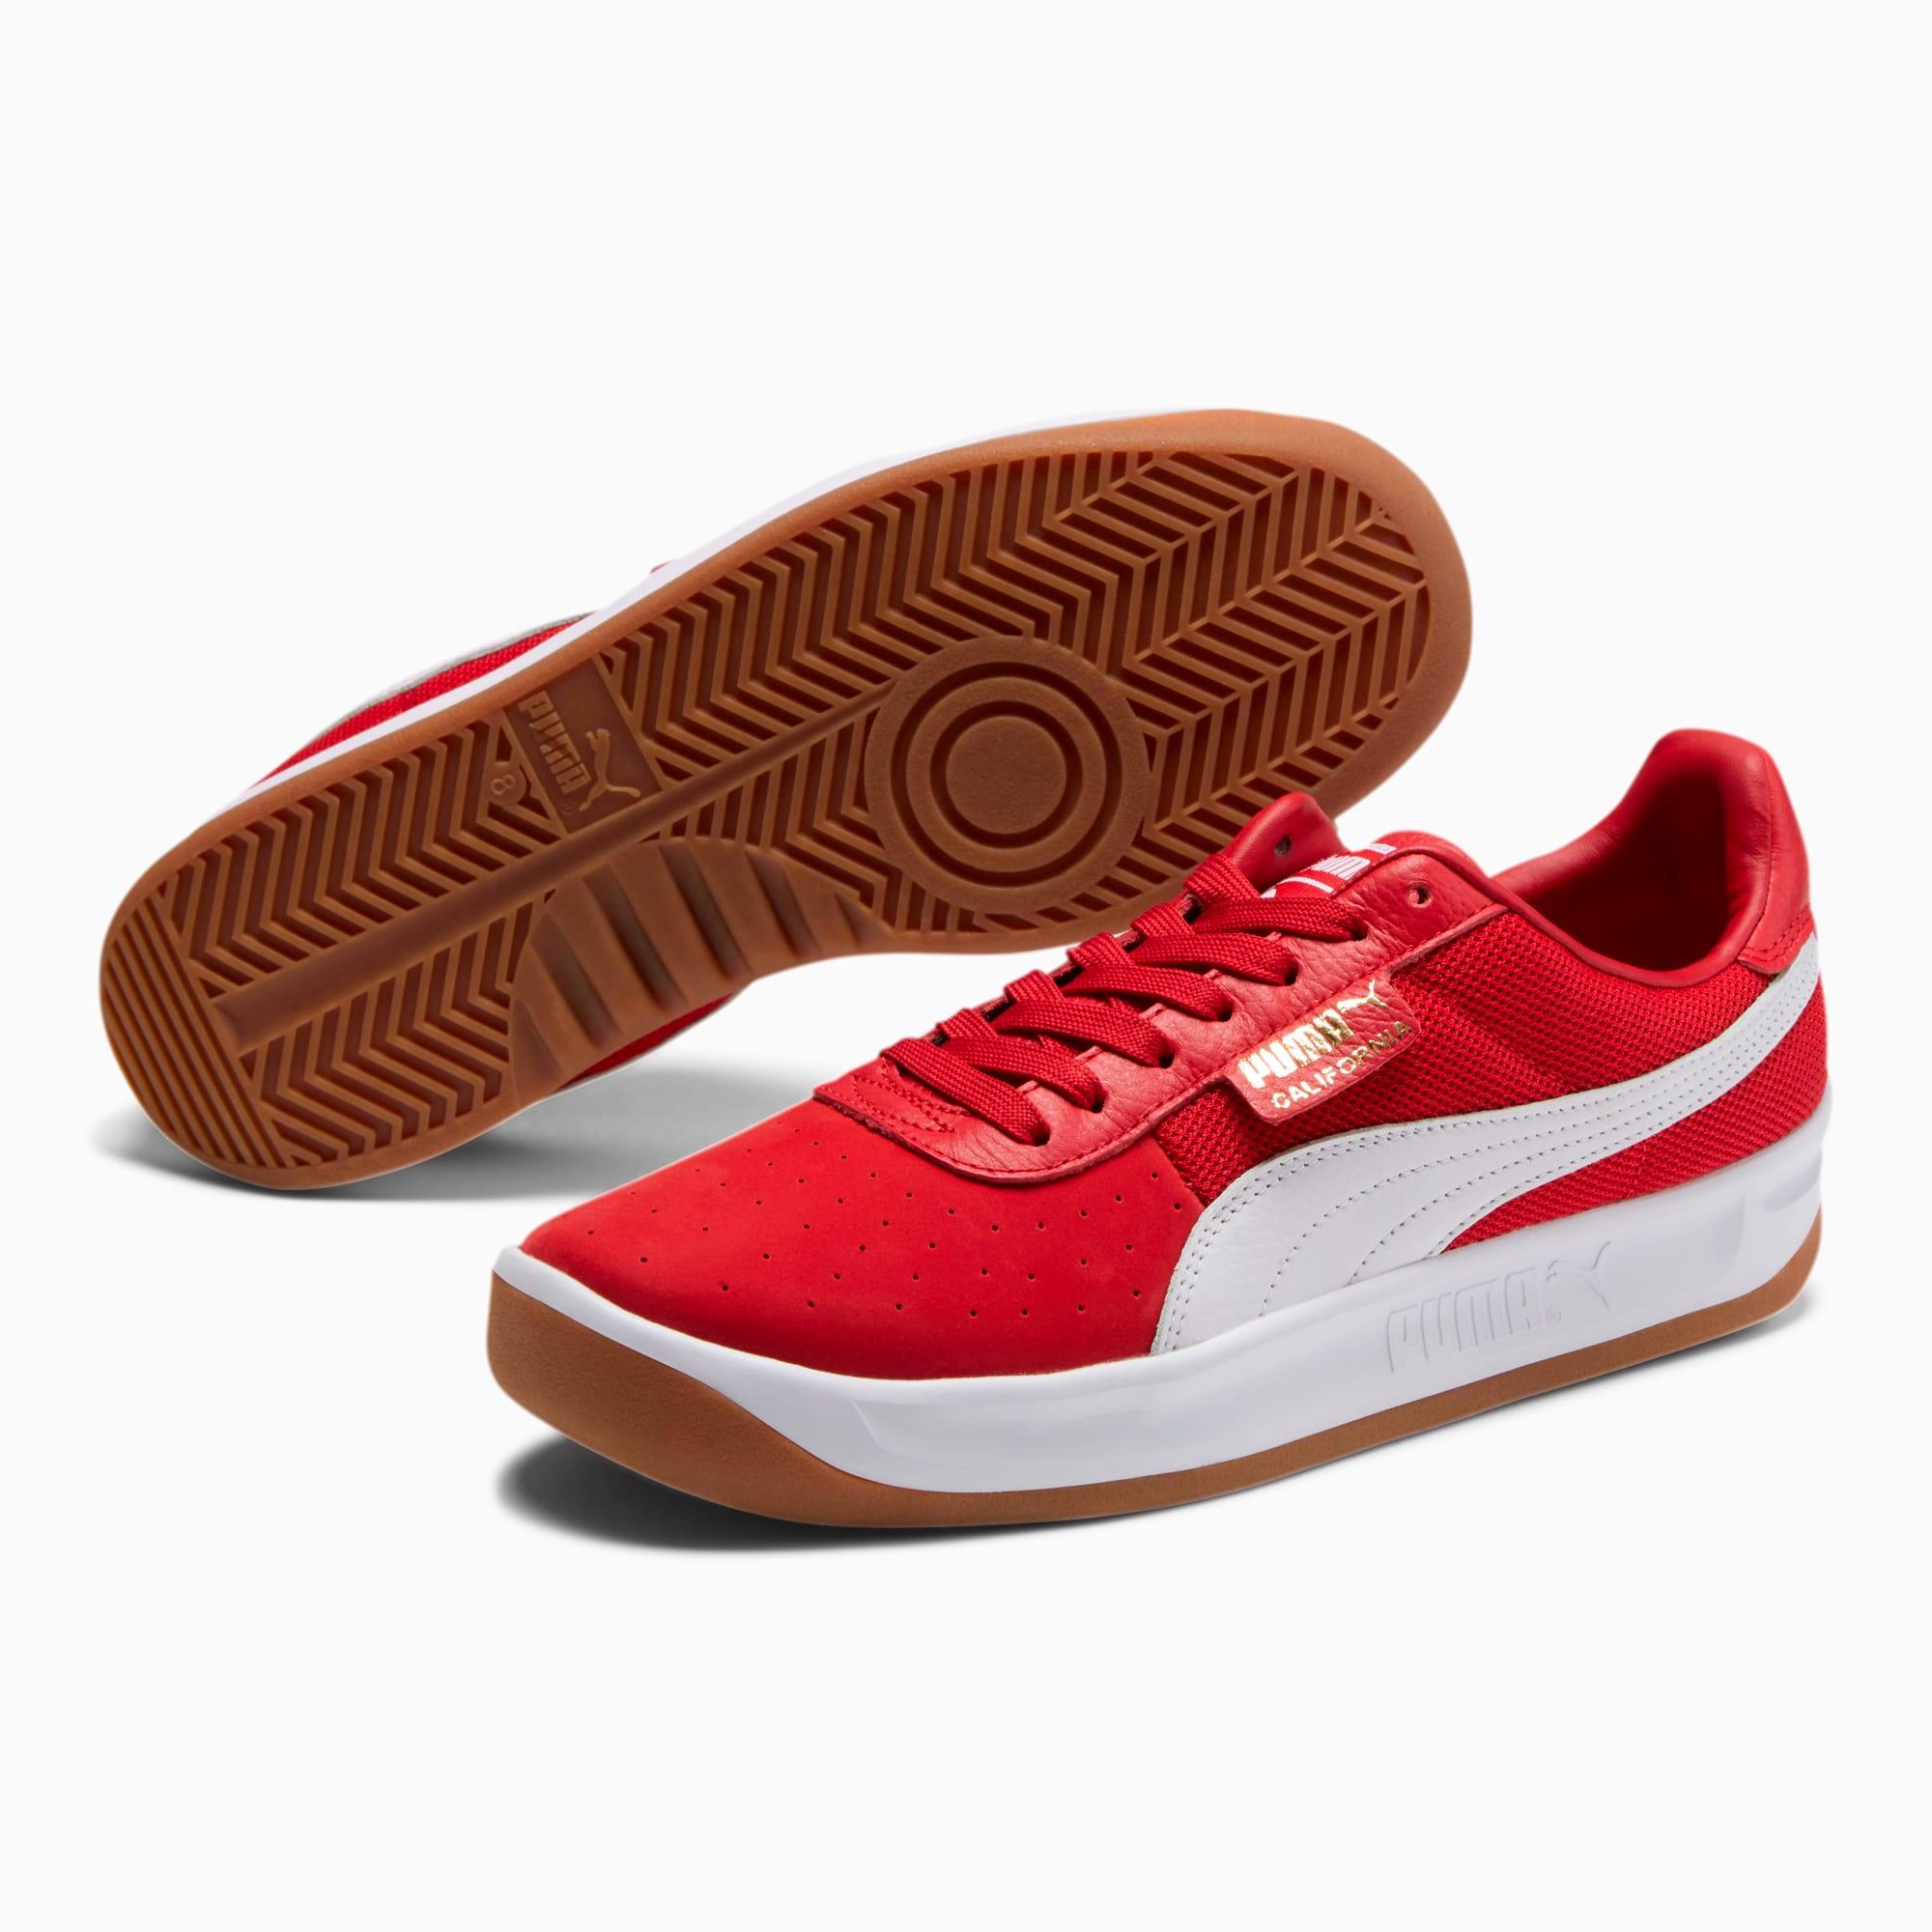 PUMA Leather California Casual Sneakers in Red for Men - Lyst